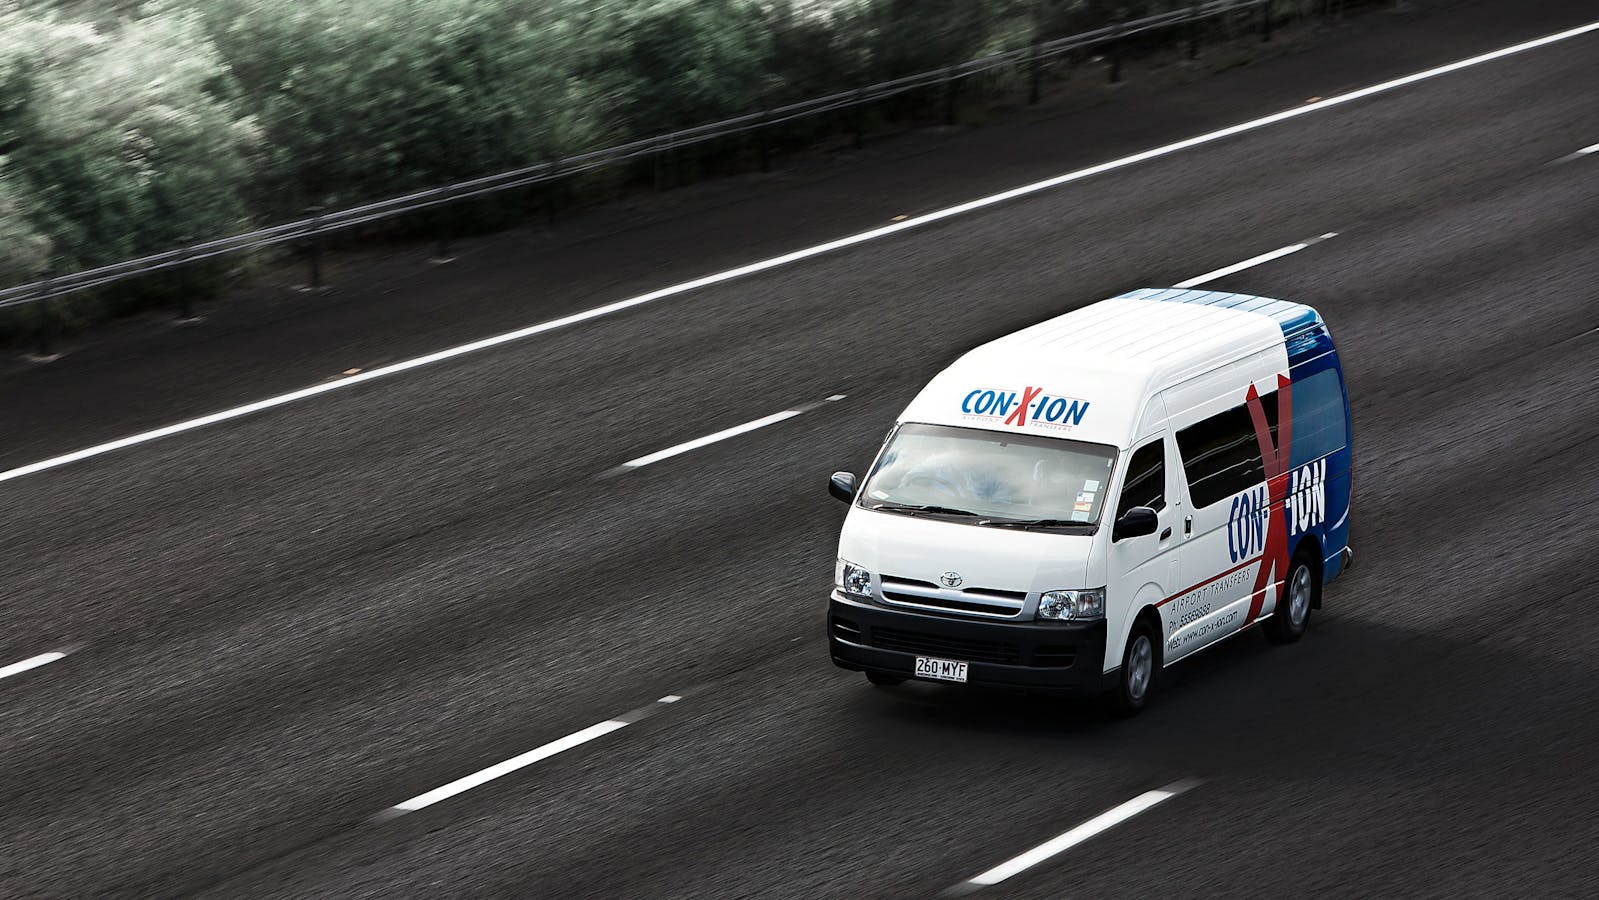 Con-x-ion provides efficient, cost effective transfers.